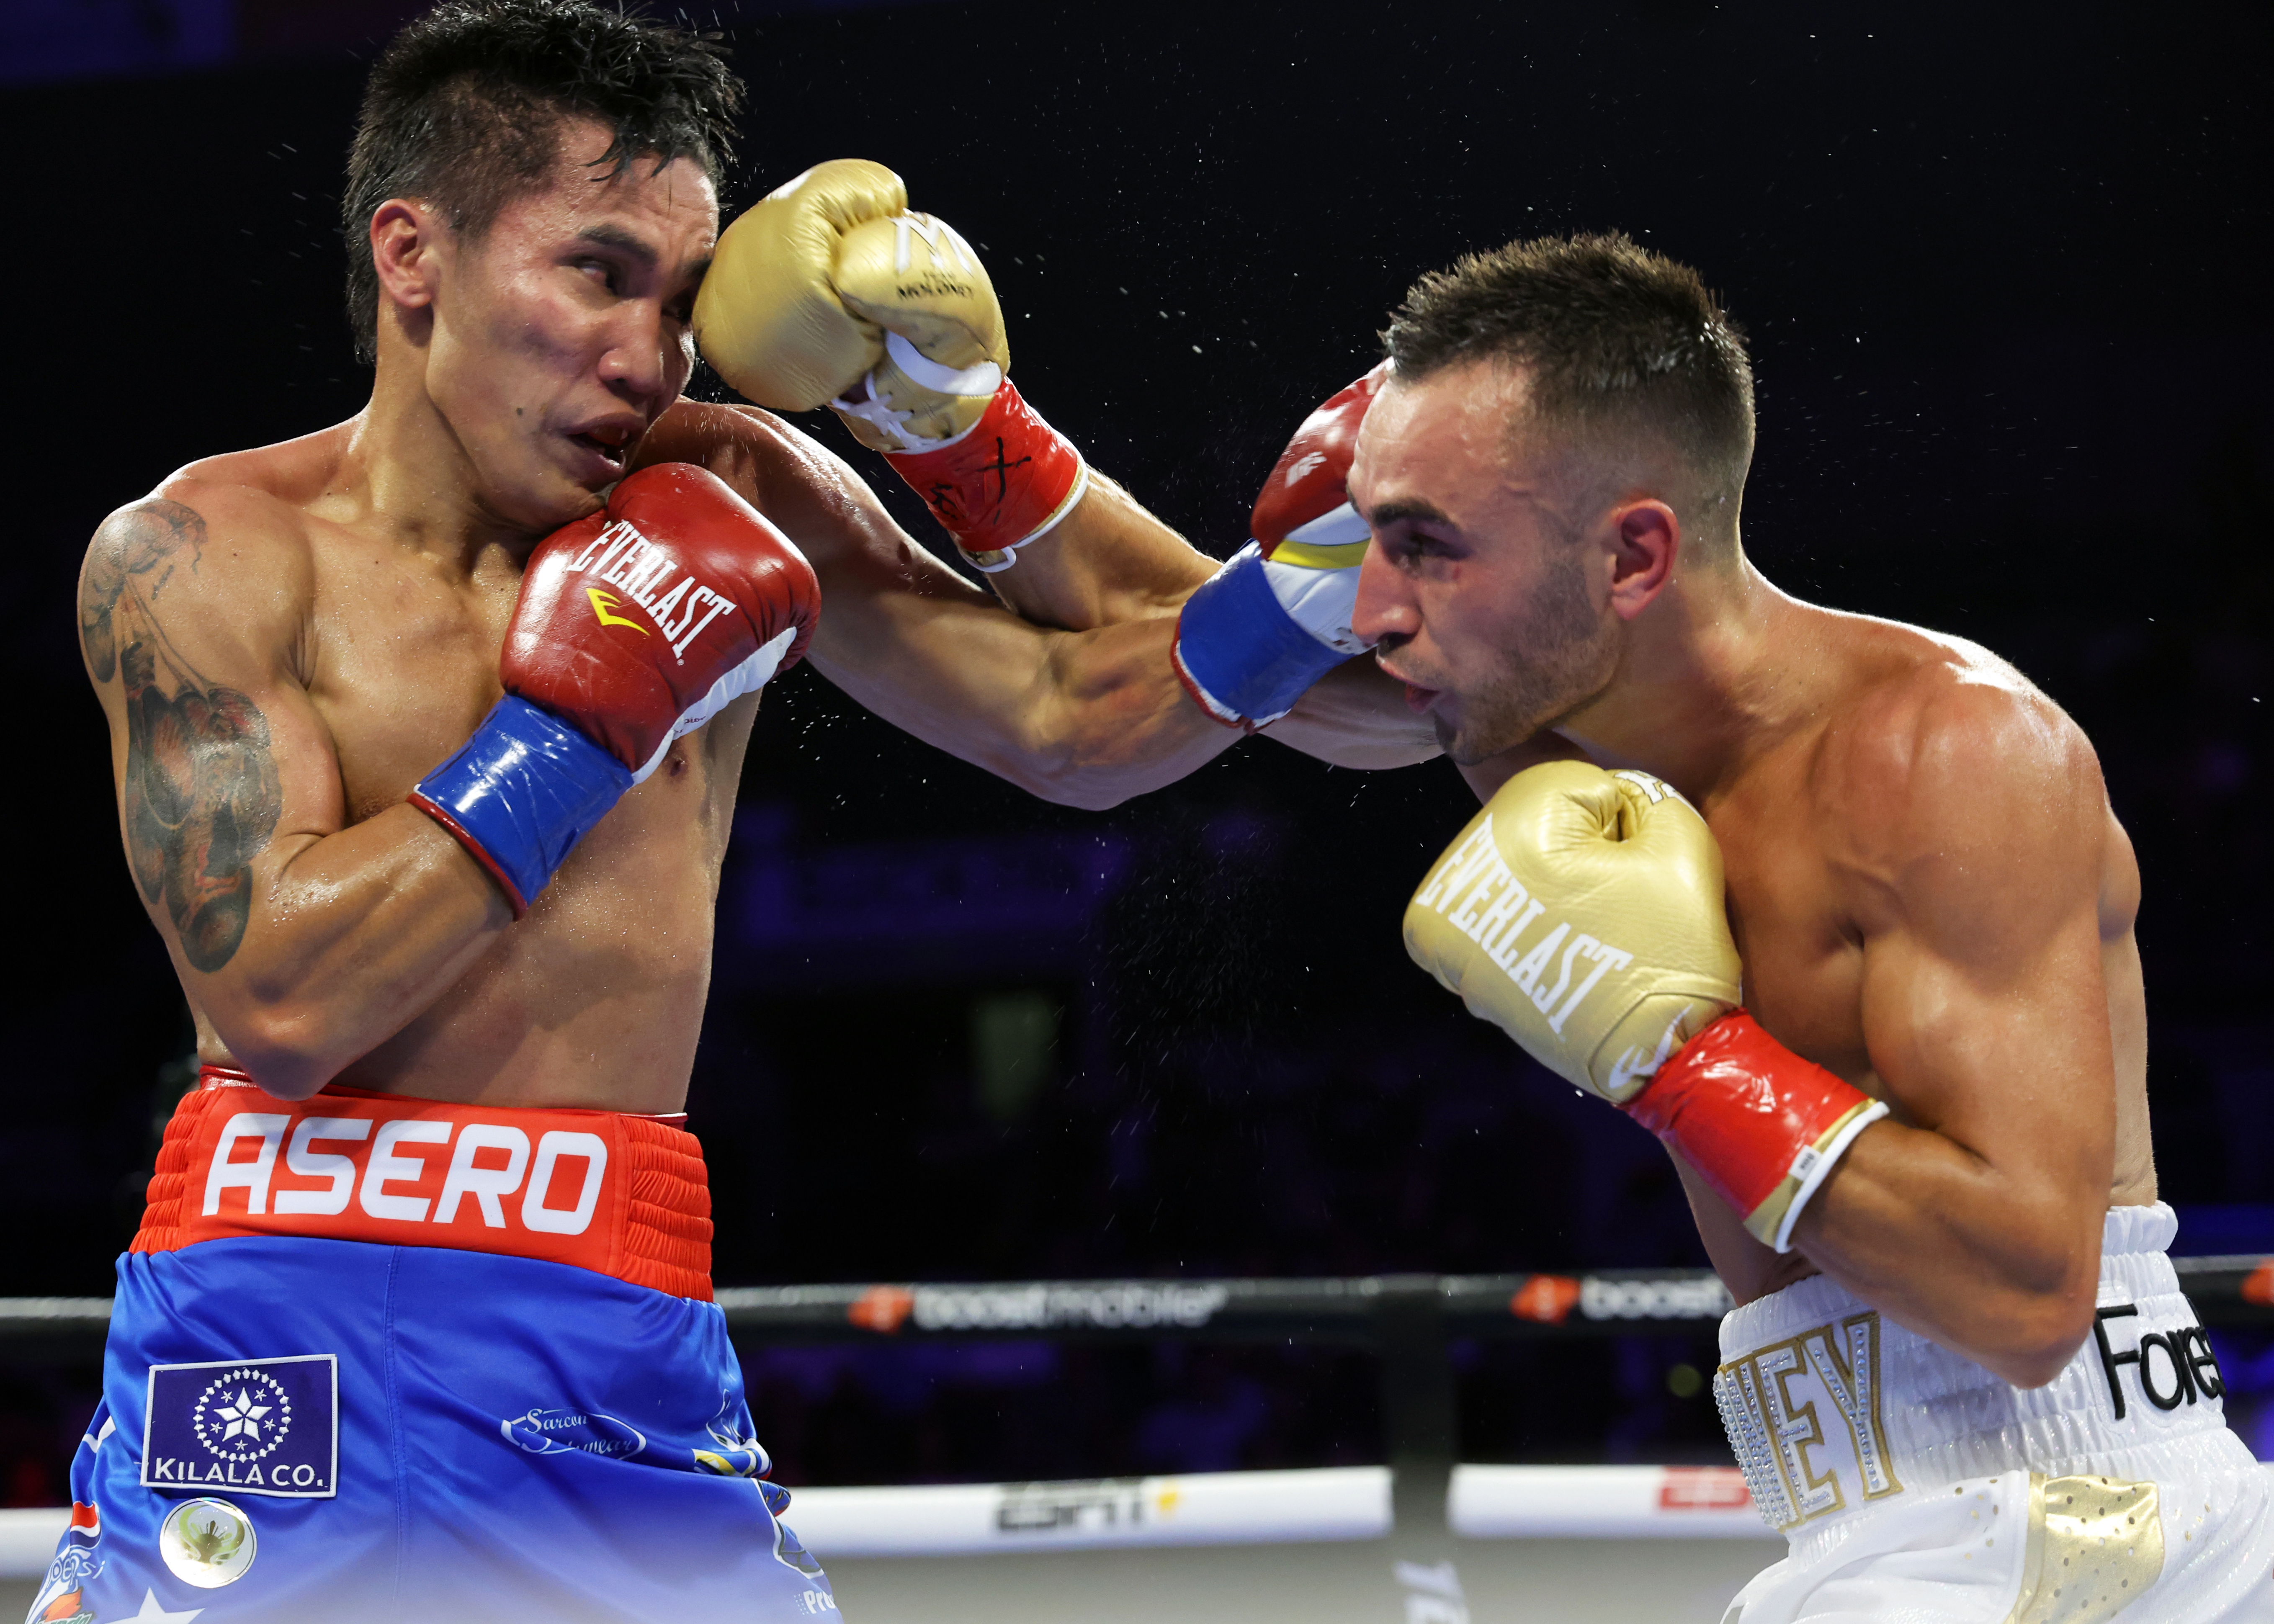 Vincent Astrolabio (left) and Jason Moloney exchange punches during their WBO bantamweight championship fight.